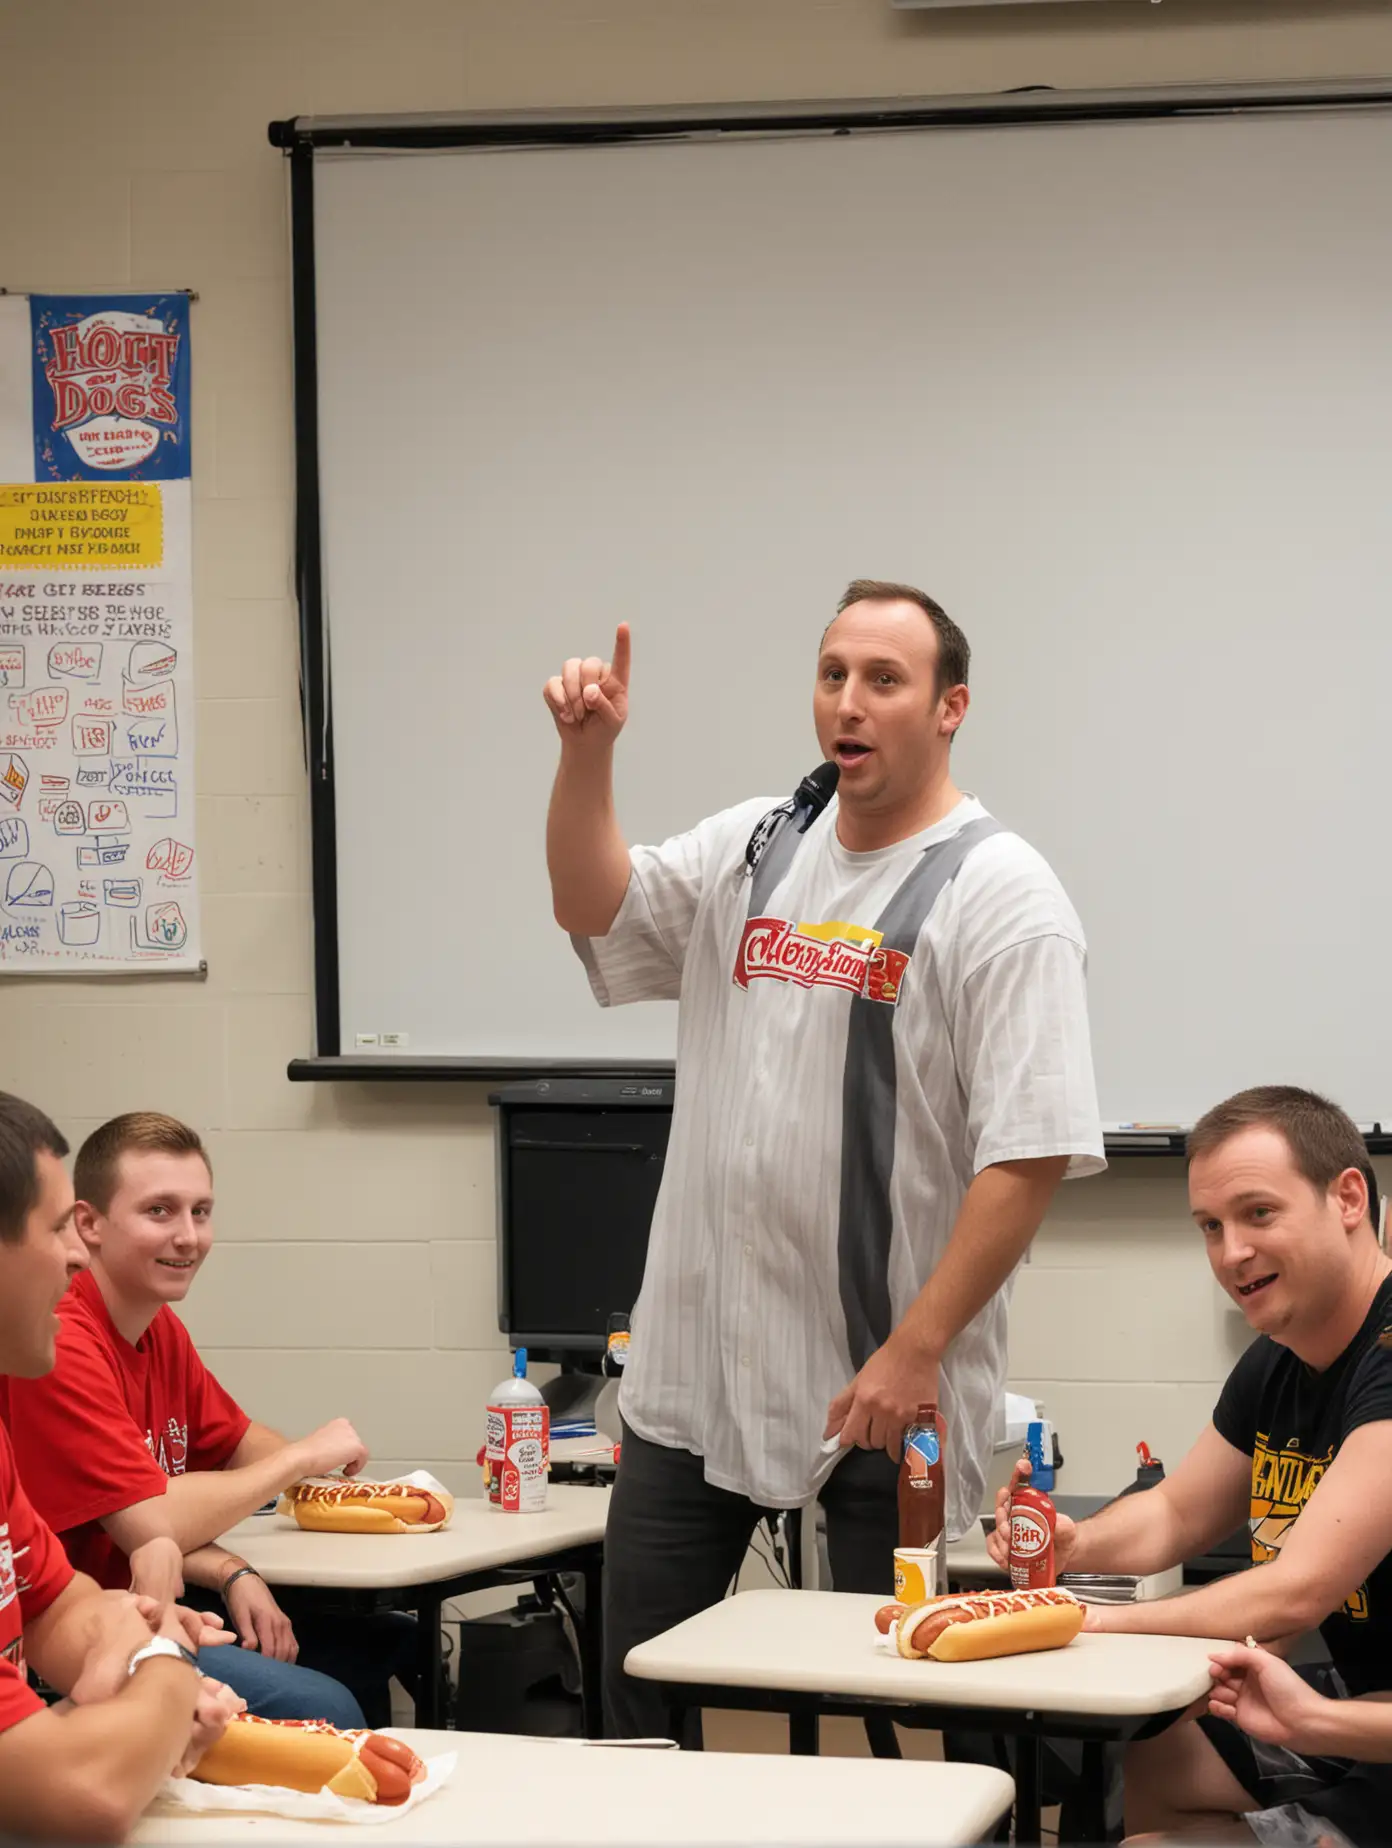 Joey Chestnut in the front of a classroom doing a presentation about hot dogs

